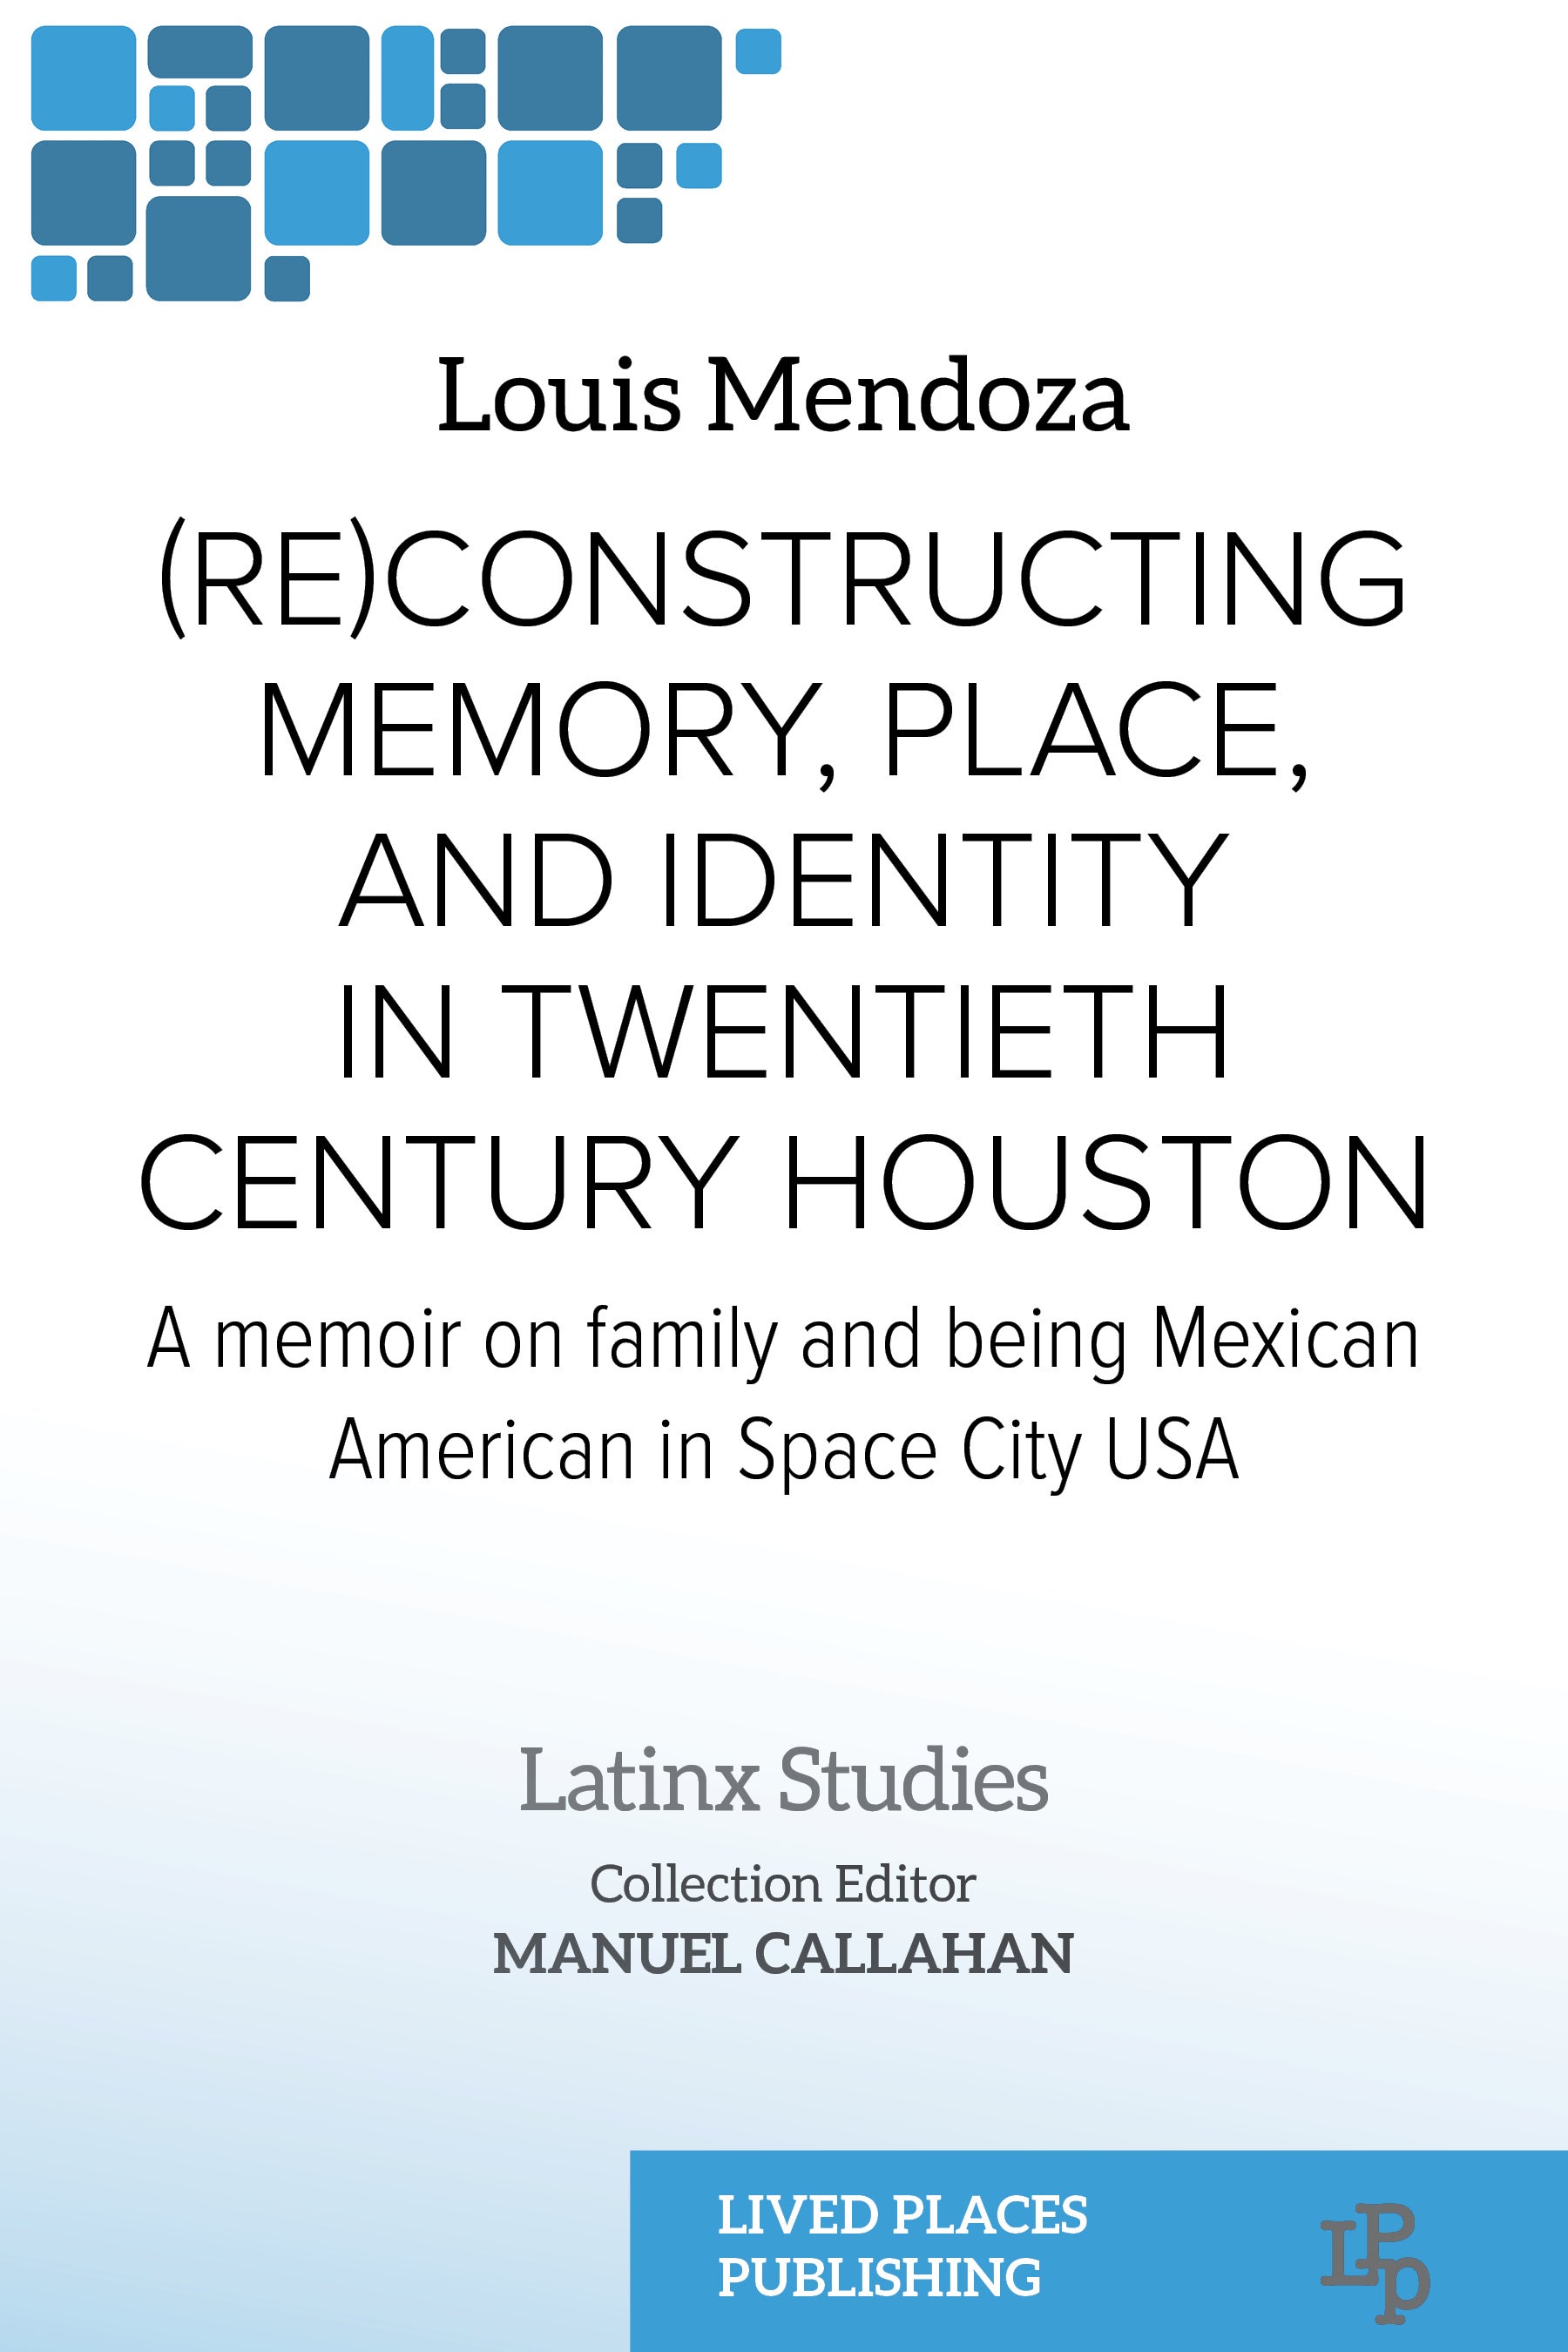 Book jacket of Reconstrucitng Memory, Place, and Identity